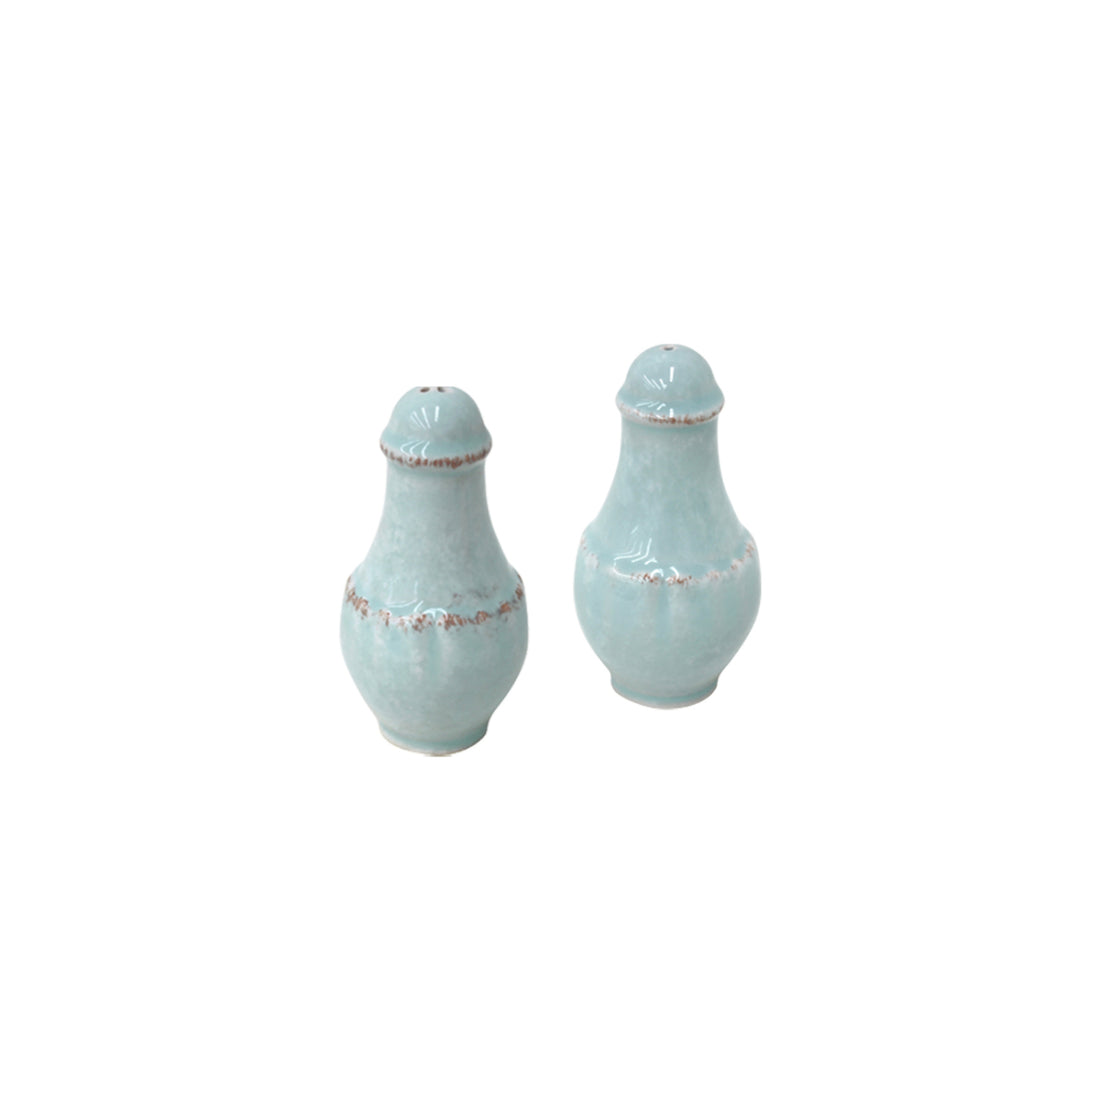 Impressions Blue Salt and Pepper Shakers